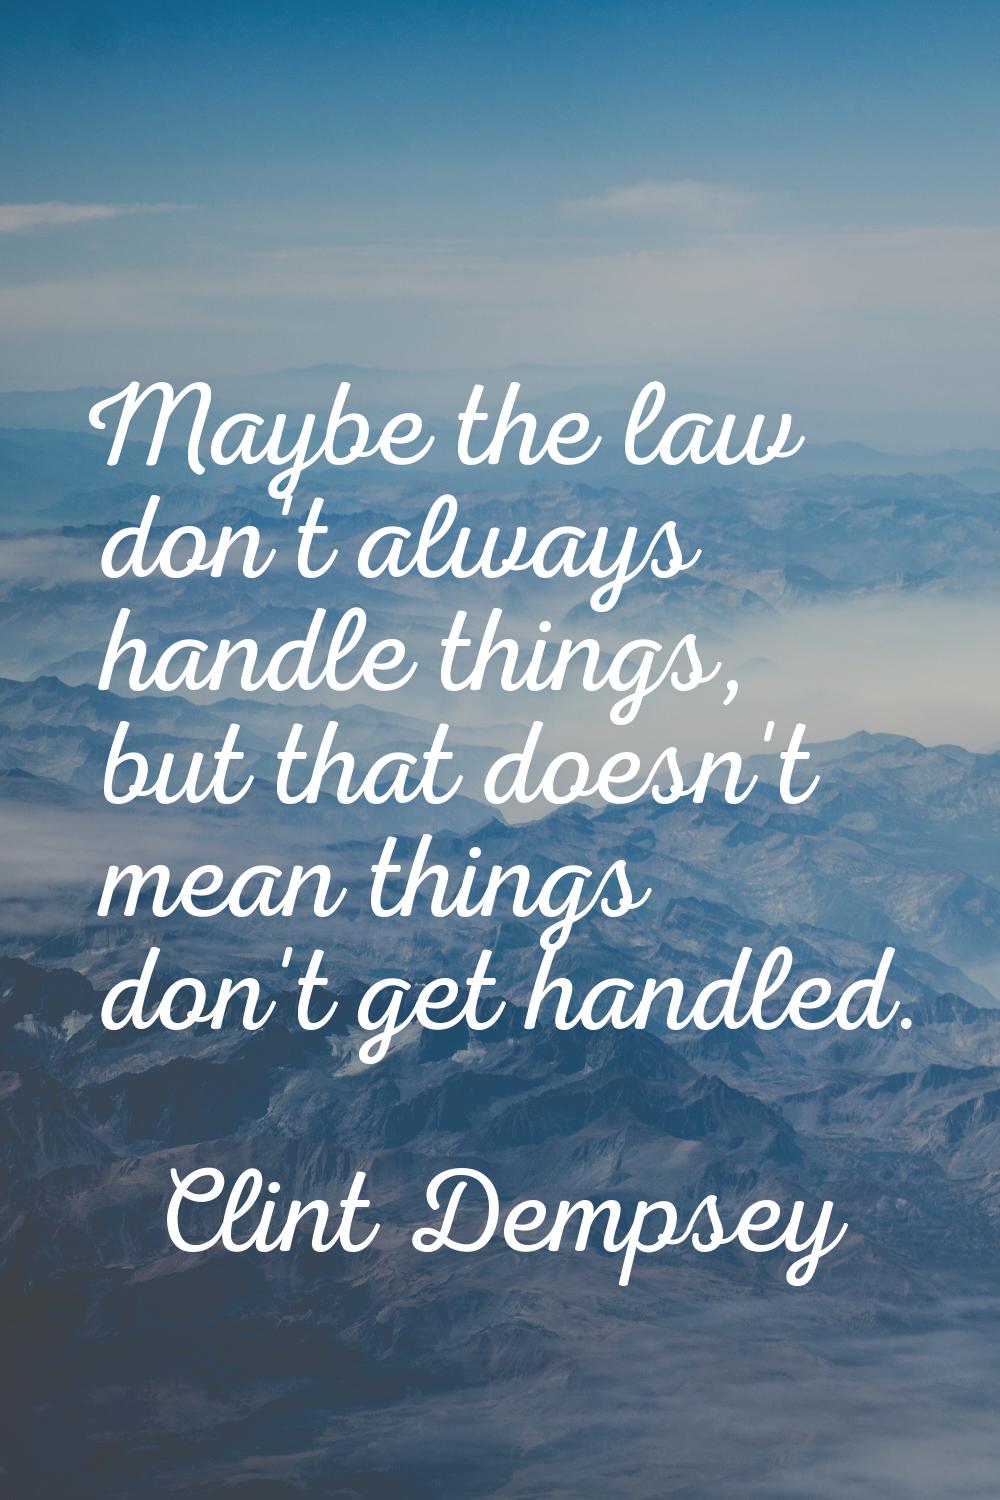 Maybe the law don't always handle things, but that doesn't mean things don't get handled.